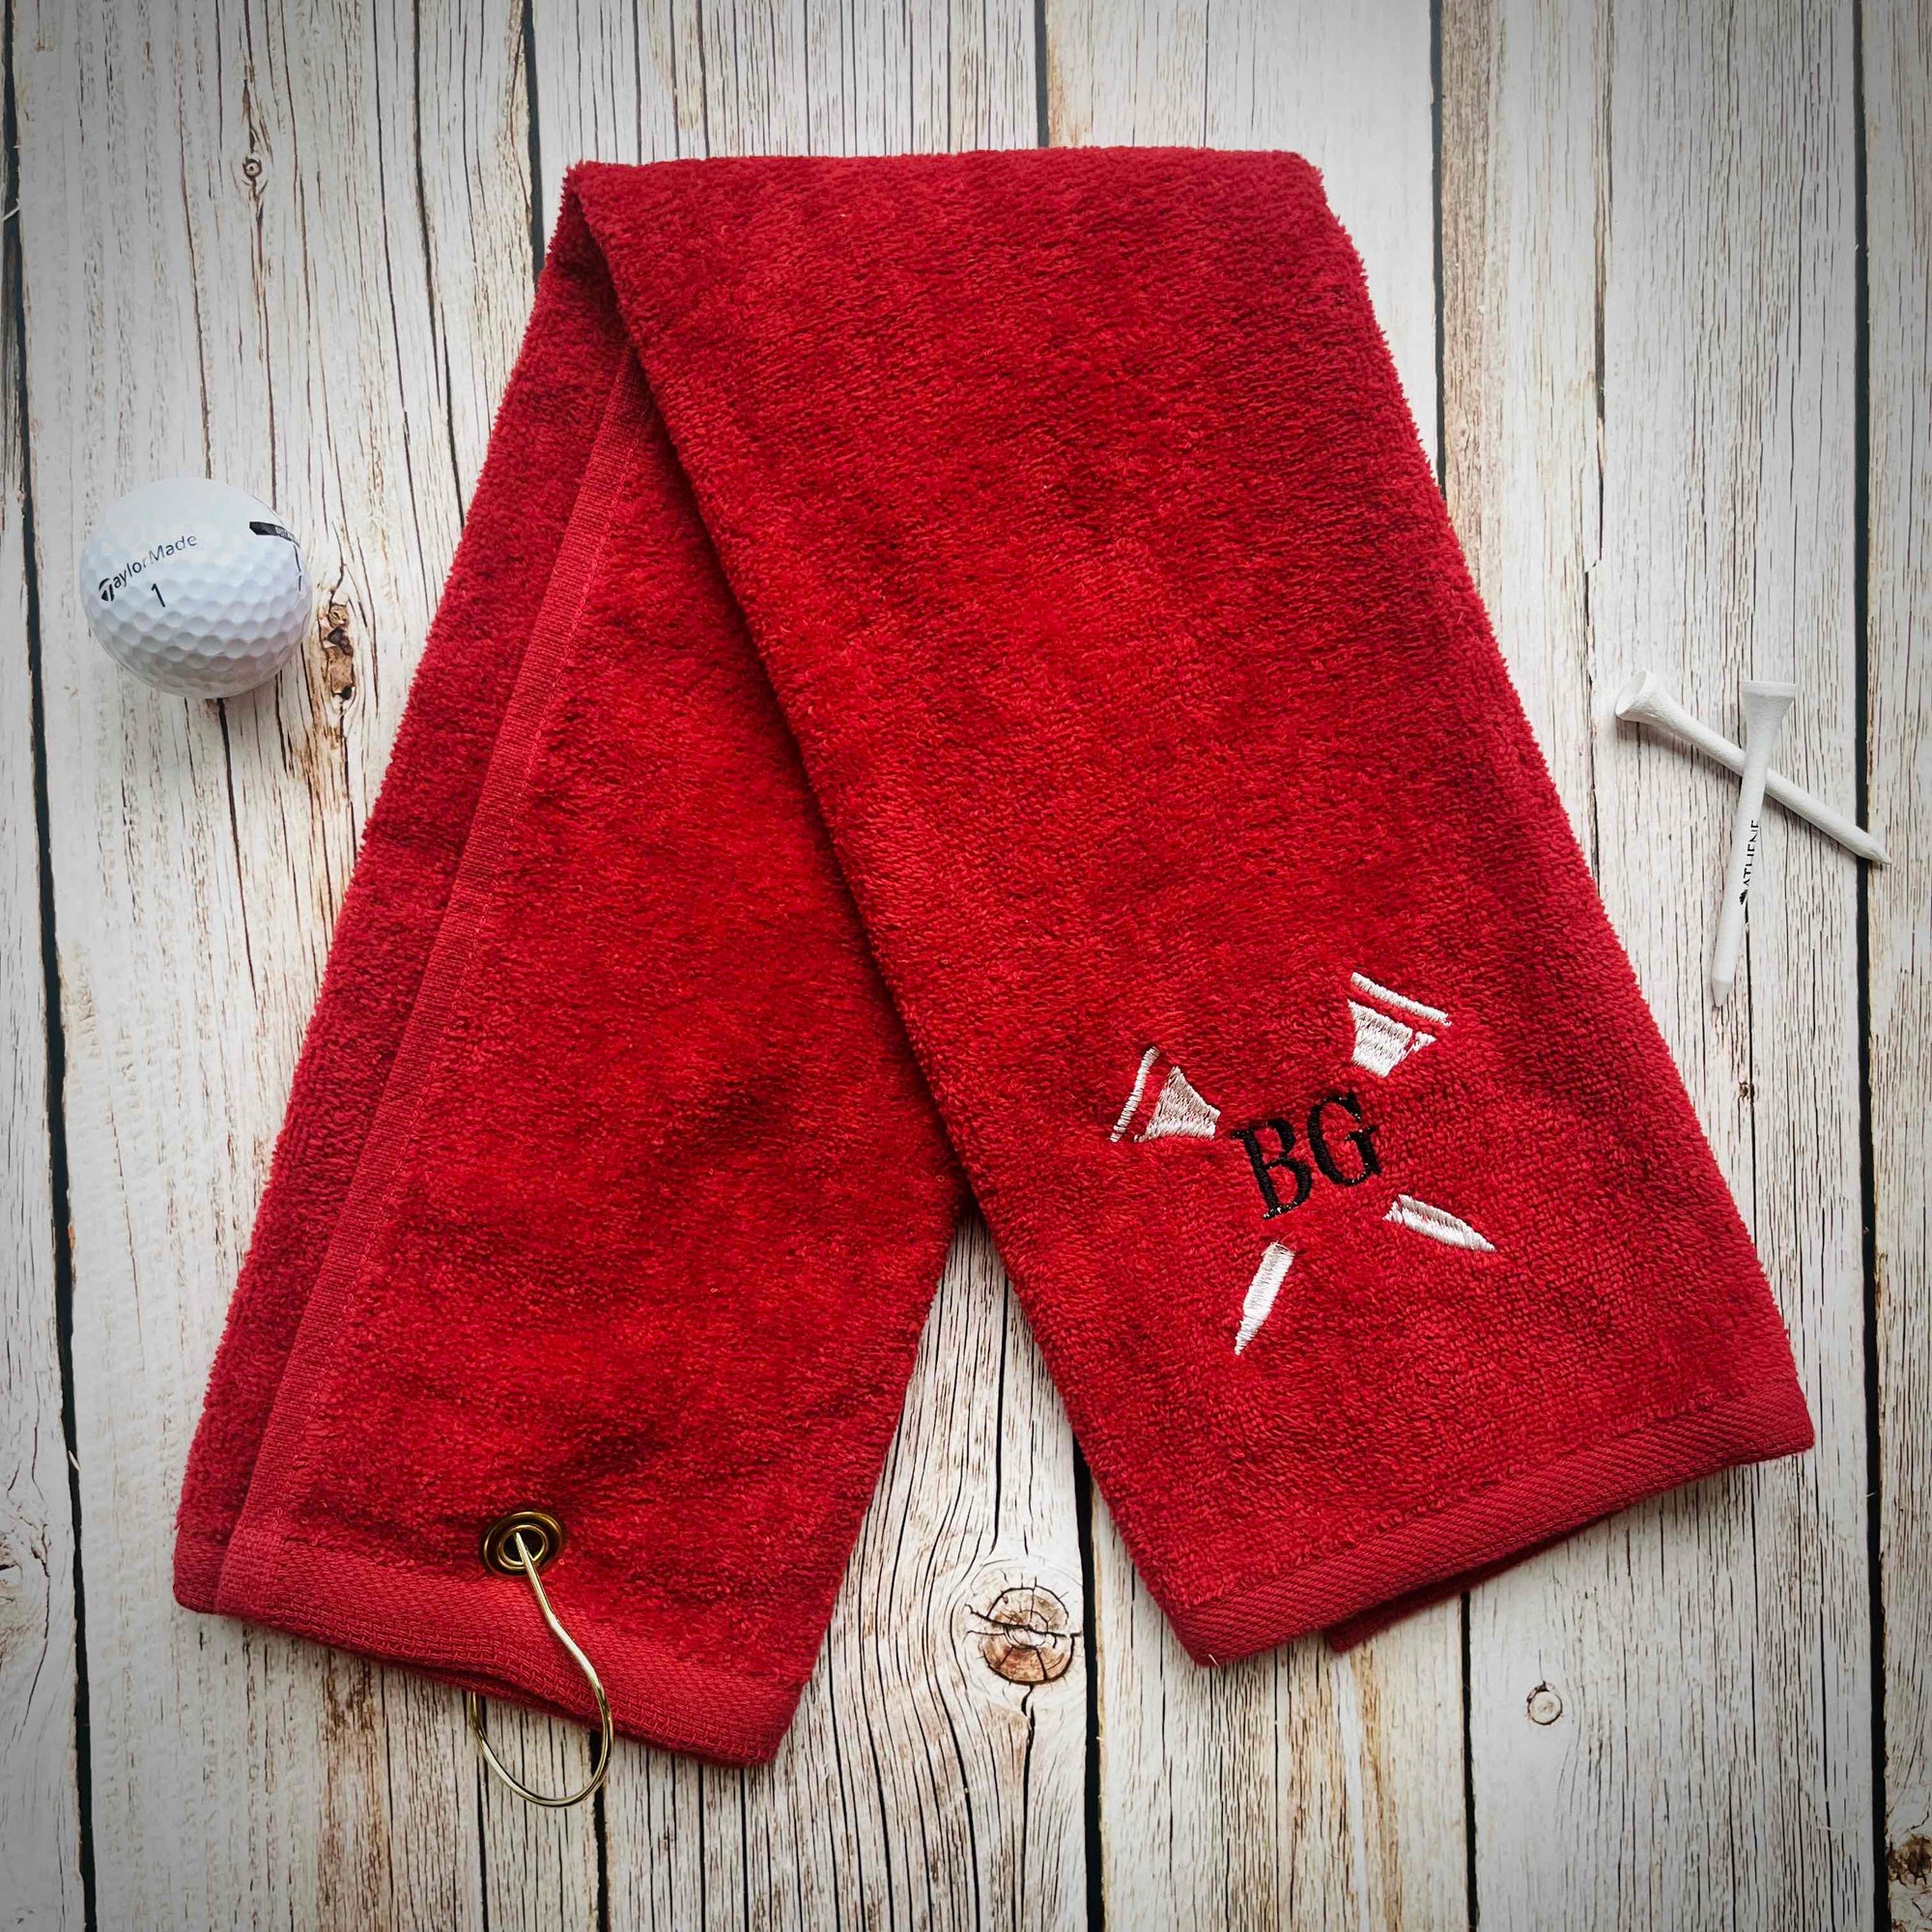 Keep Your Game Fresh with Our Golf Towels Selection - Groovy Golfer